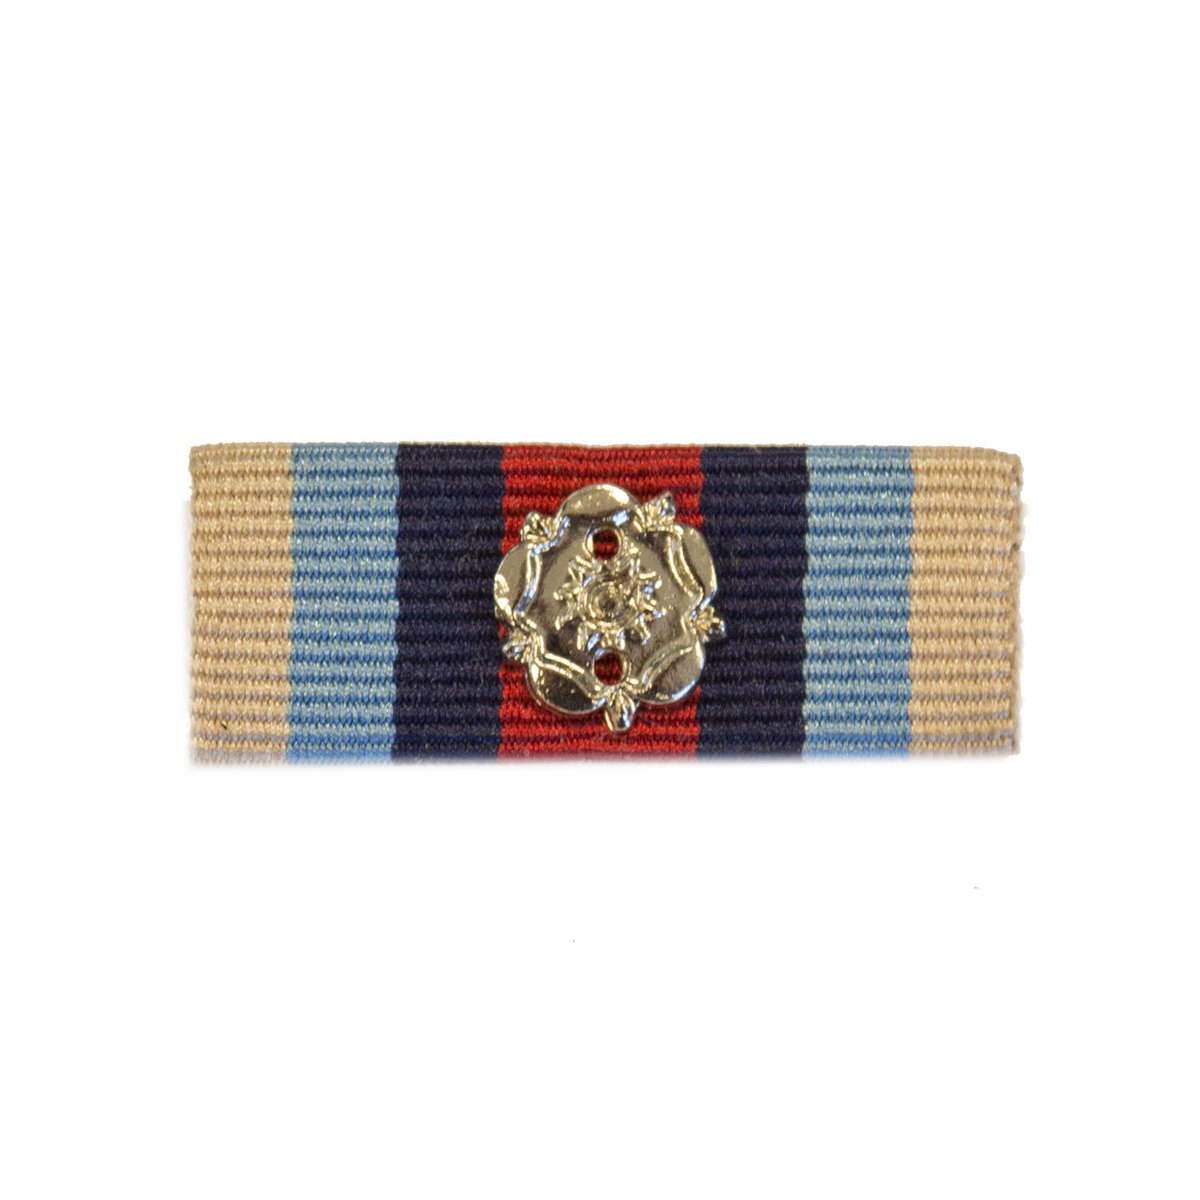 Dont miss out on the latest products to be added to Wyedean Stores! ow.ly/pA5R30mRhnu #BritishArmy #ROyalNavy #RAF #MedalRibbon #MedalRibbonSliders #MilitaryCushions #Badges #RussiaBraid #BraidedCord #Chevron